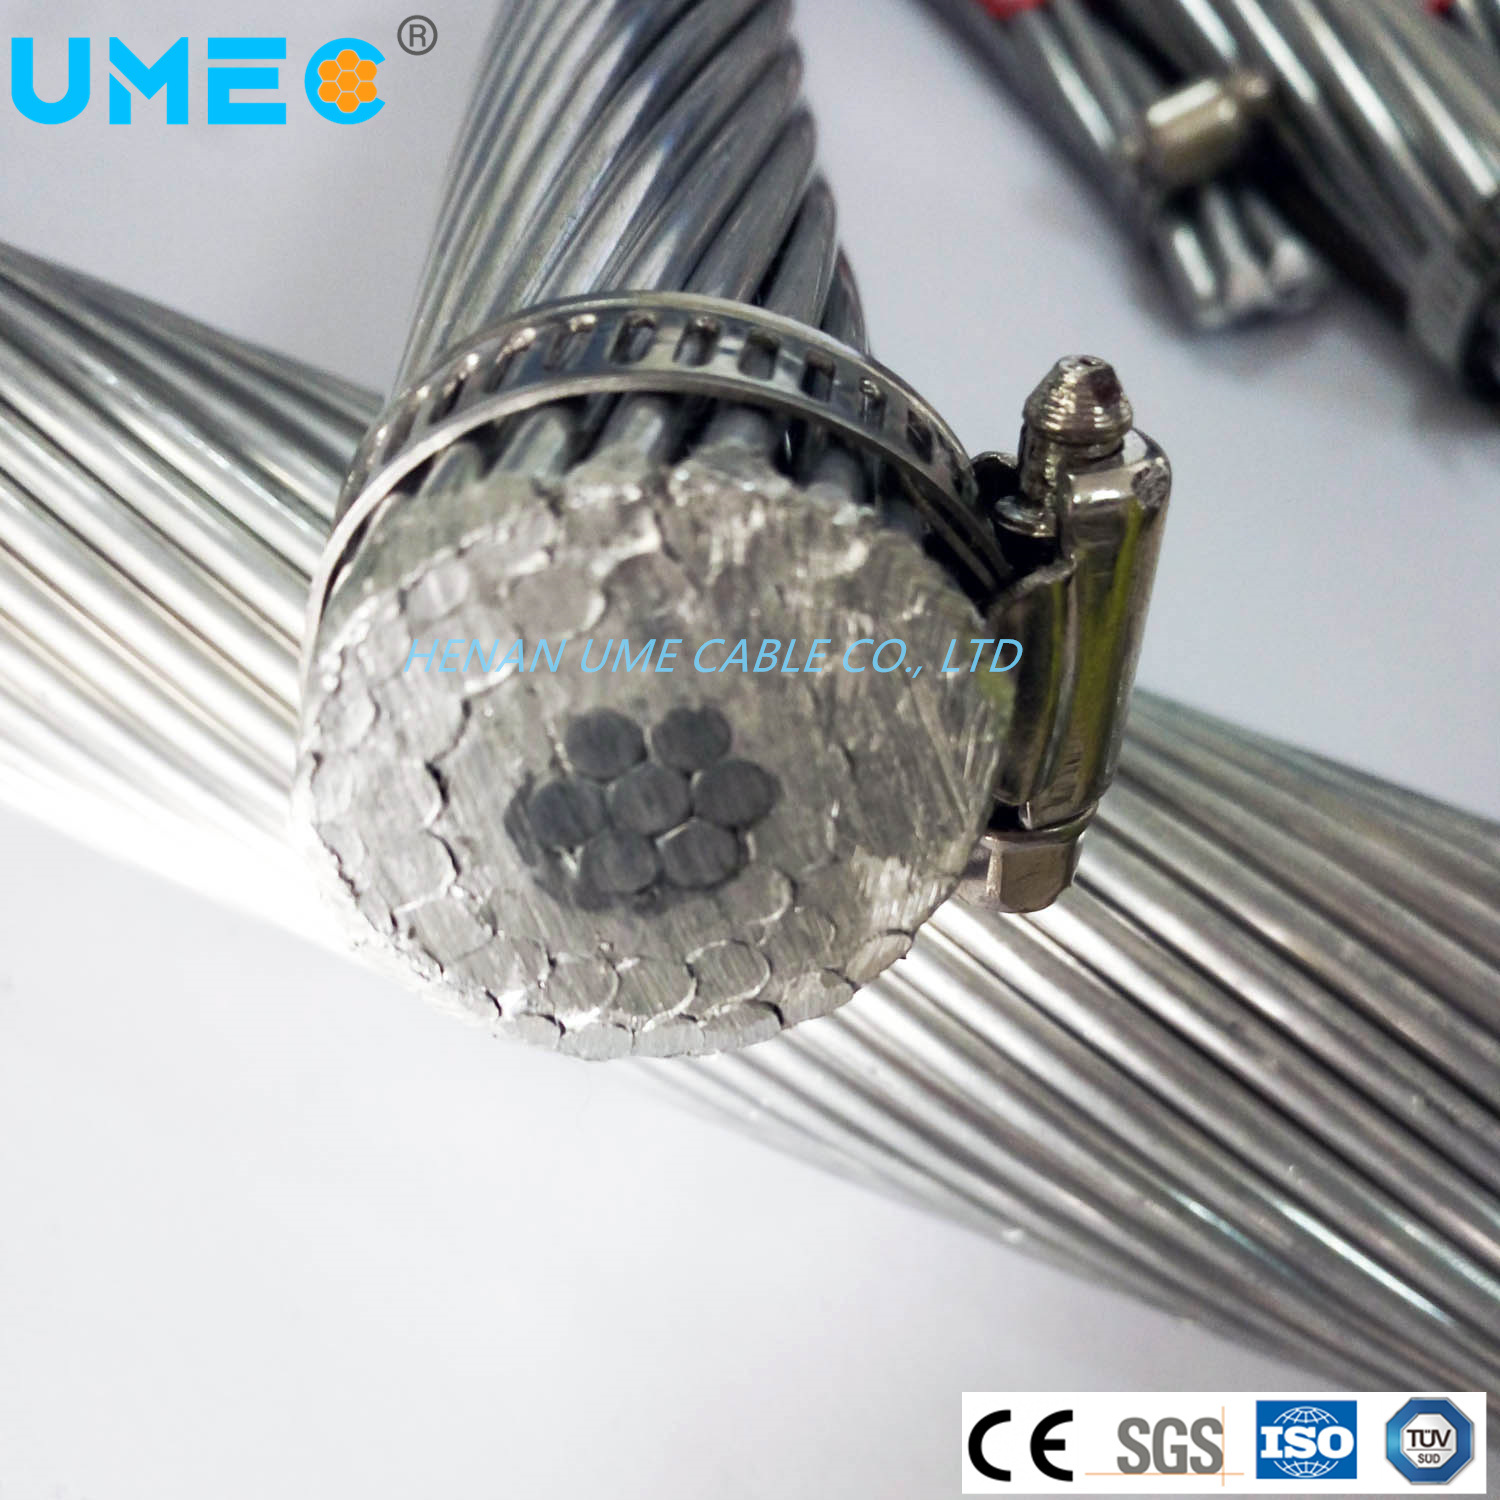 ACSR Conductor ASTM B232 Bare Aluminum Conductor Steel Reinforced Overhead Transmission Line Cable 1033.5mcm 1351.5mcm 1590mcm